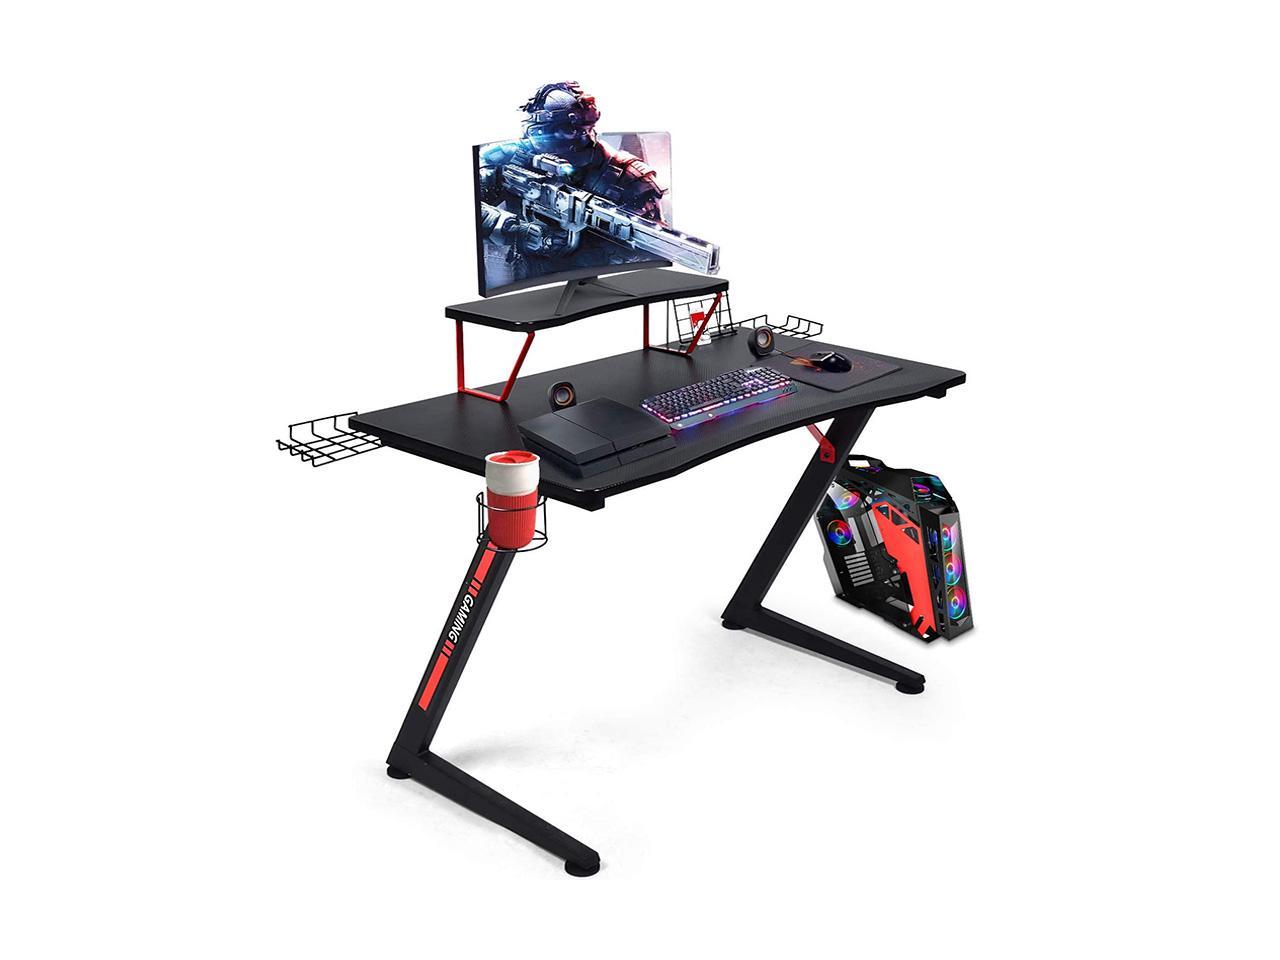 GTRACING Gaming Desk,Computer Desk with Storage,Ergonomic Z-Shaped Gaming Table 